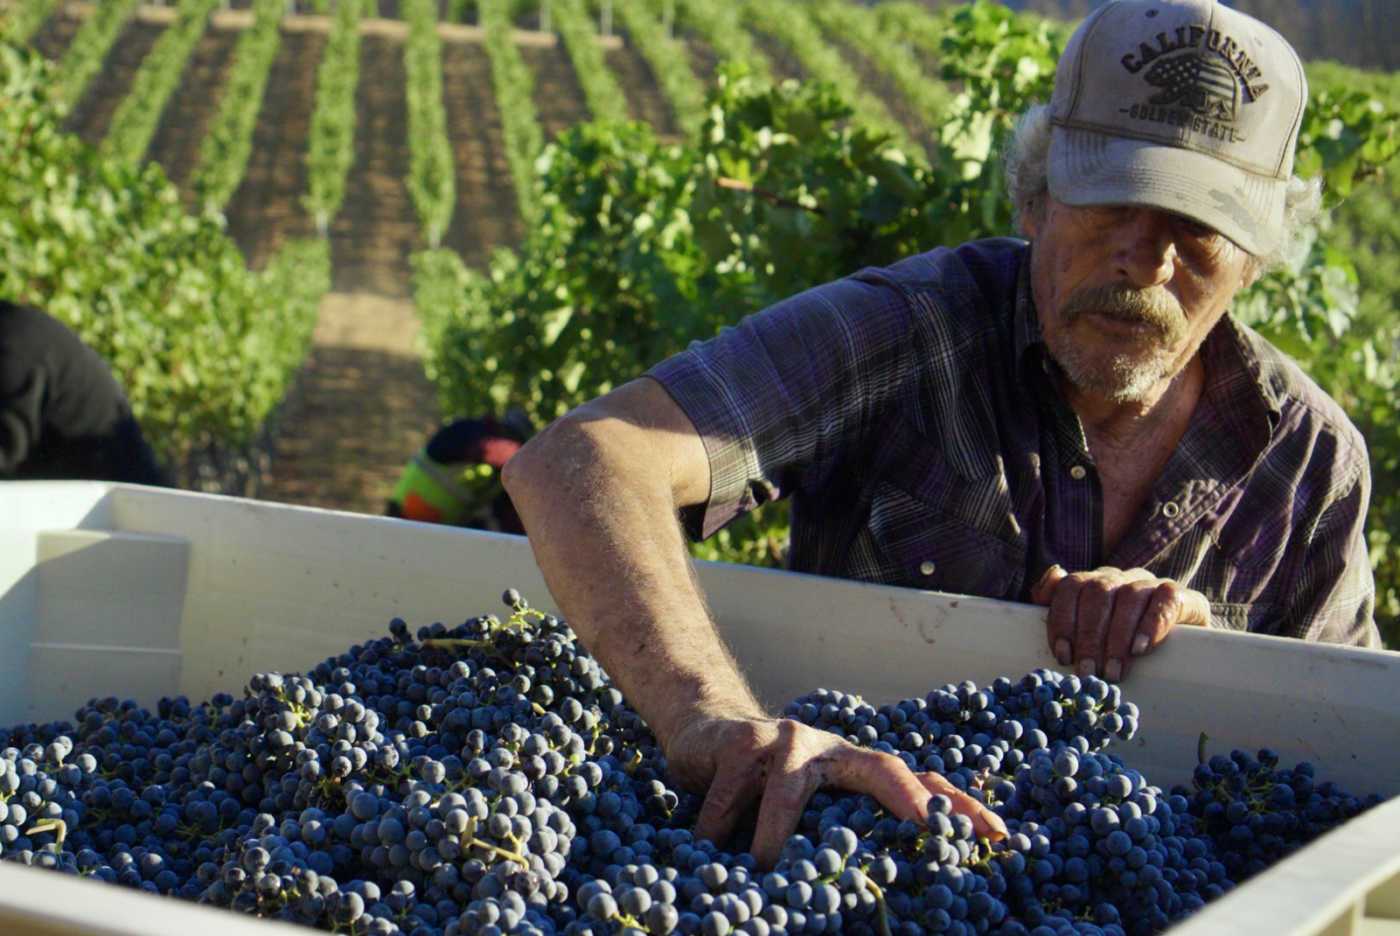 farmworker with grapes in bins during harvest